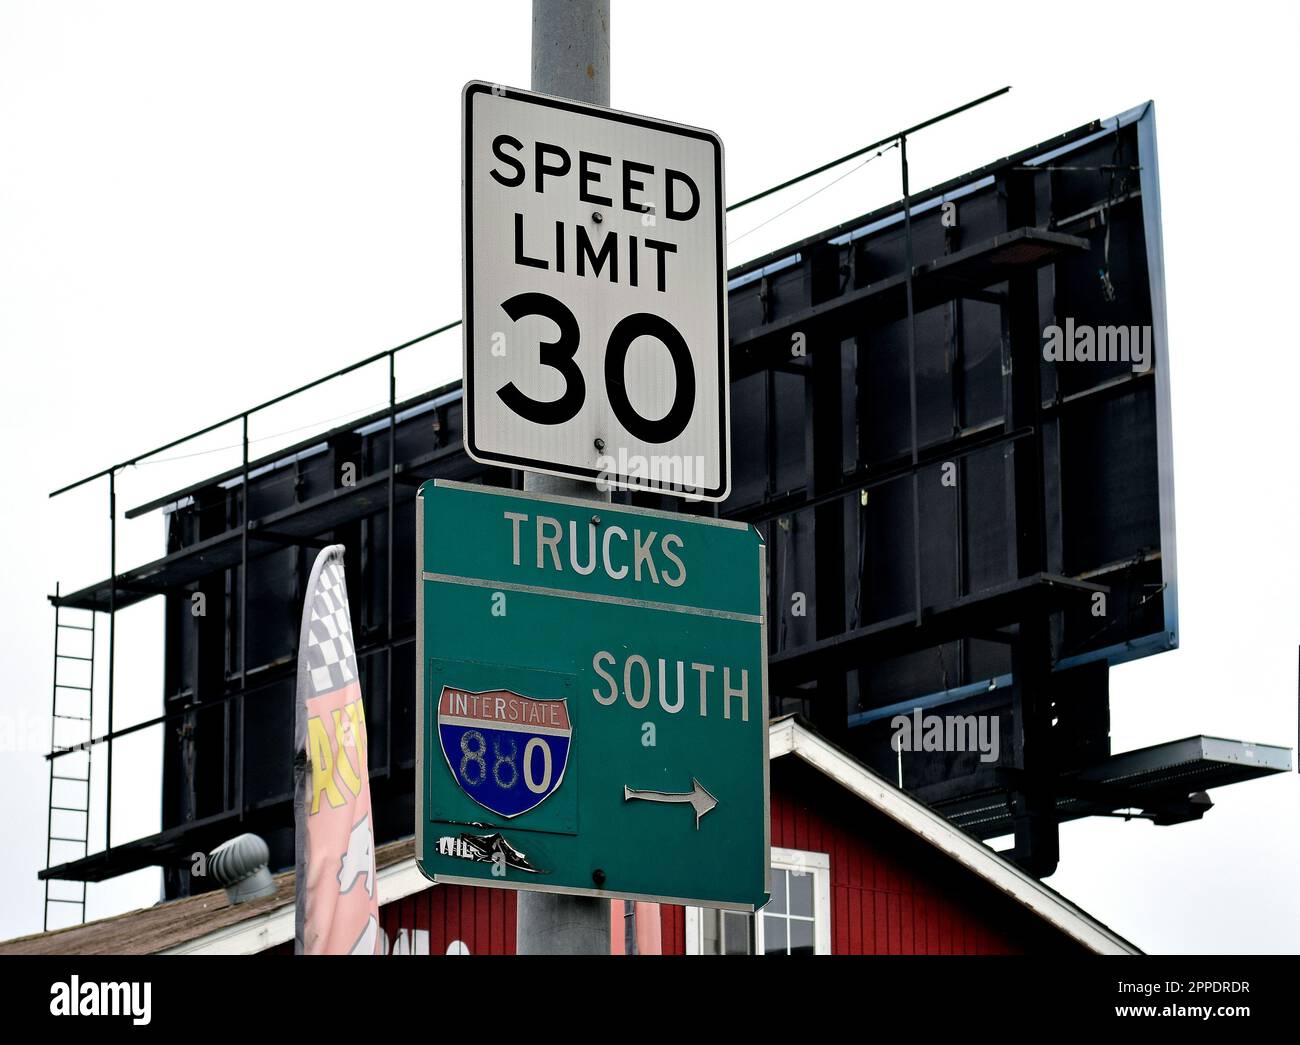 30 mph speed limit and  trucks 880 direction arrow street signs in California Stock Photo